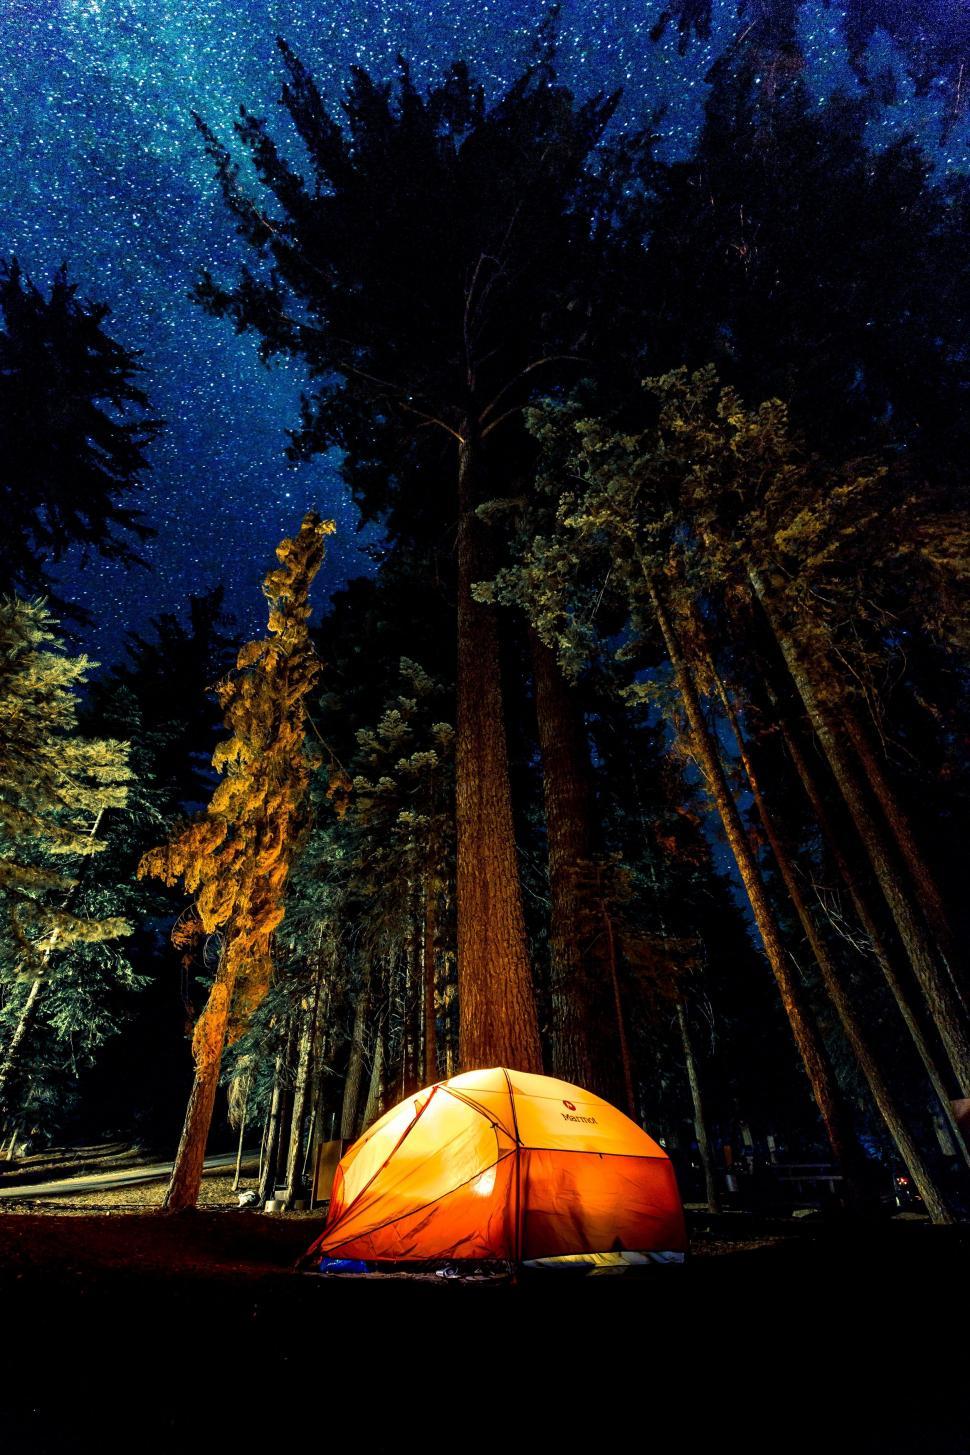 Camping tent lights Stock Photo free download